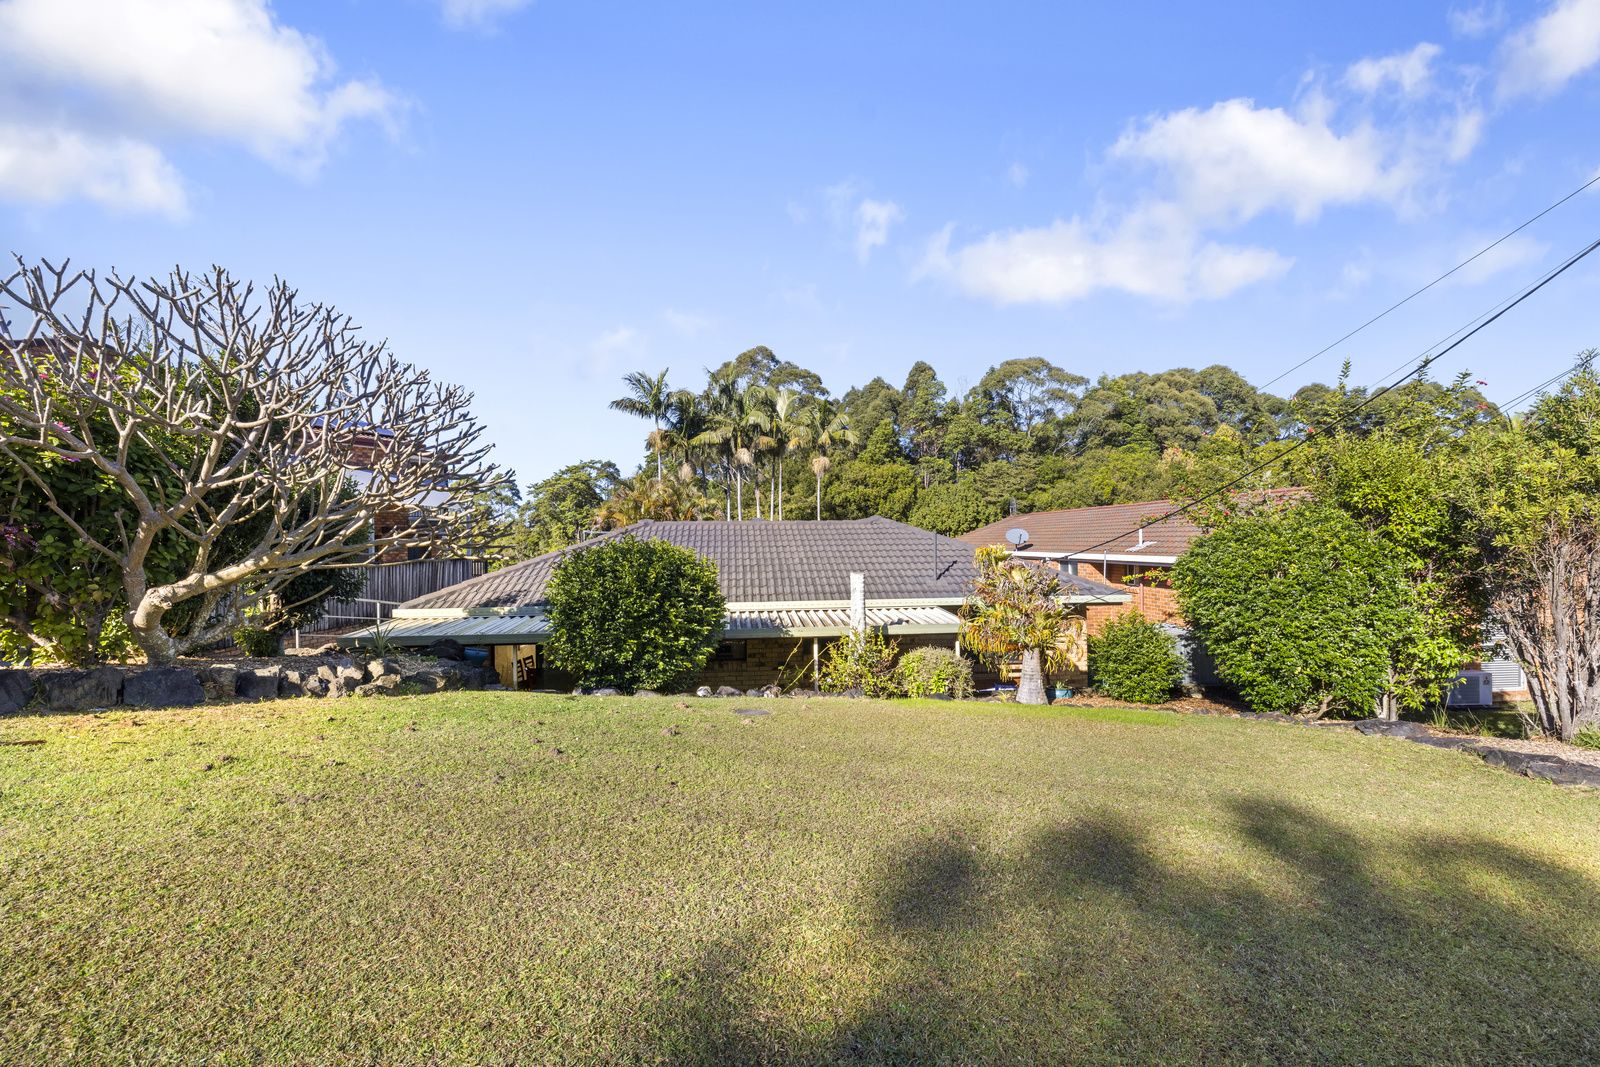 3 bedrooms Villa in 1/24 Griffith Avenue COFFS HARBOUR NSW, 2450